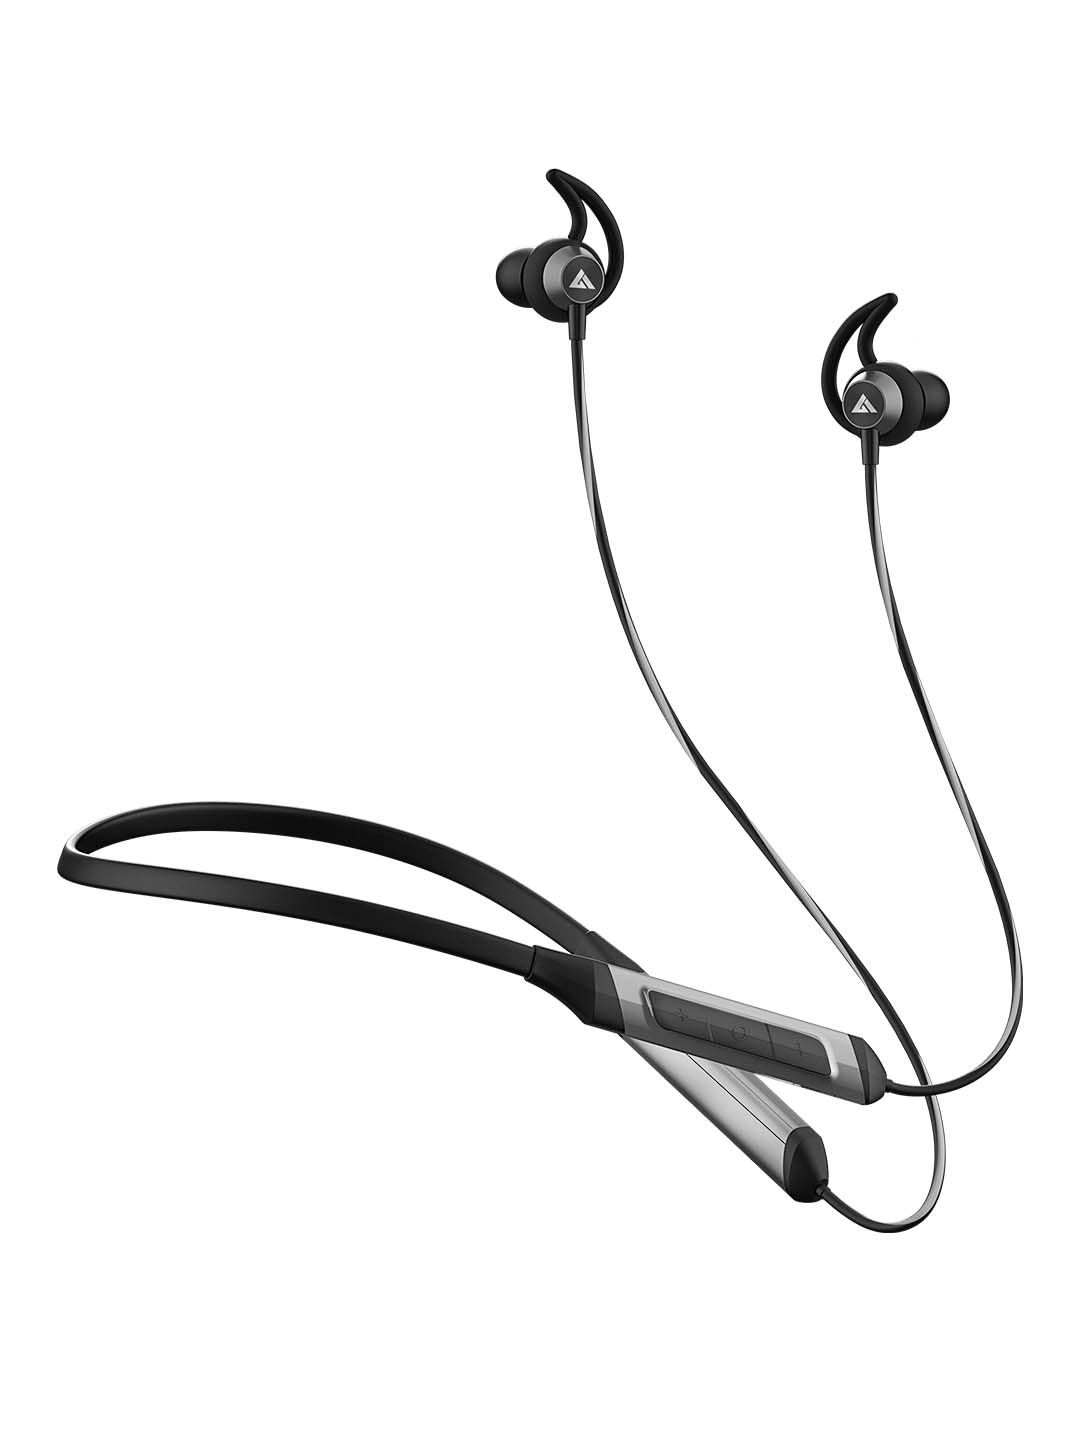 BOULT AUDIO ProBass XCharge In-Ear Wireless Bluetooth Earphones - Black Price in India